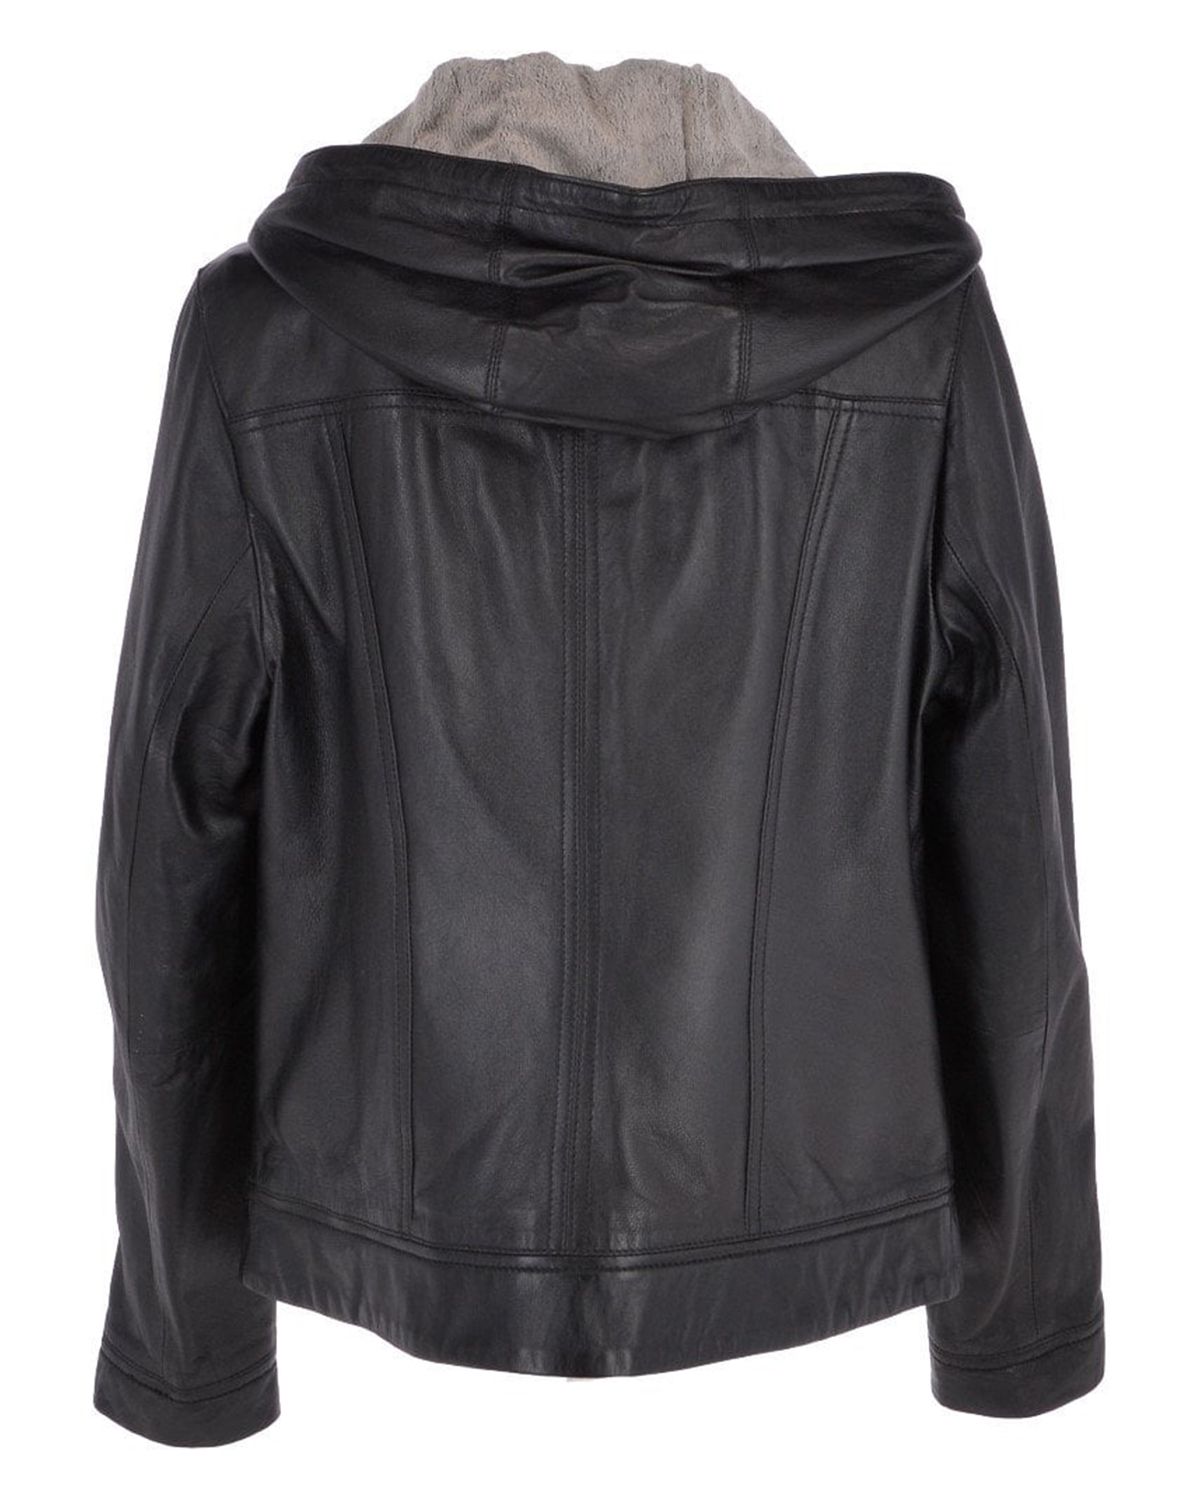 Elite Women's Two-In-One Leather Hooded Jacket